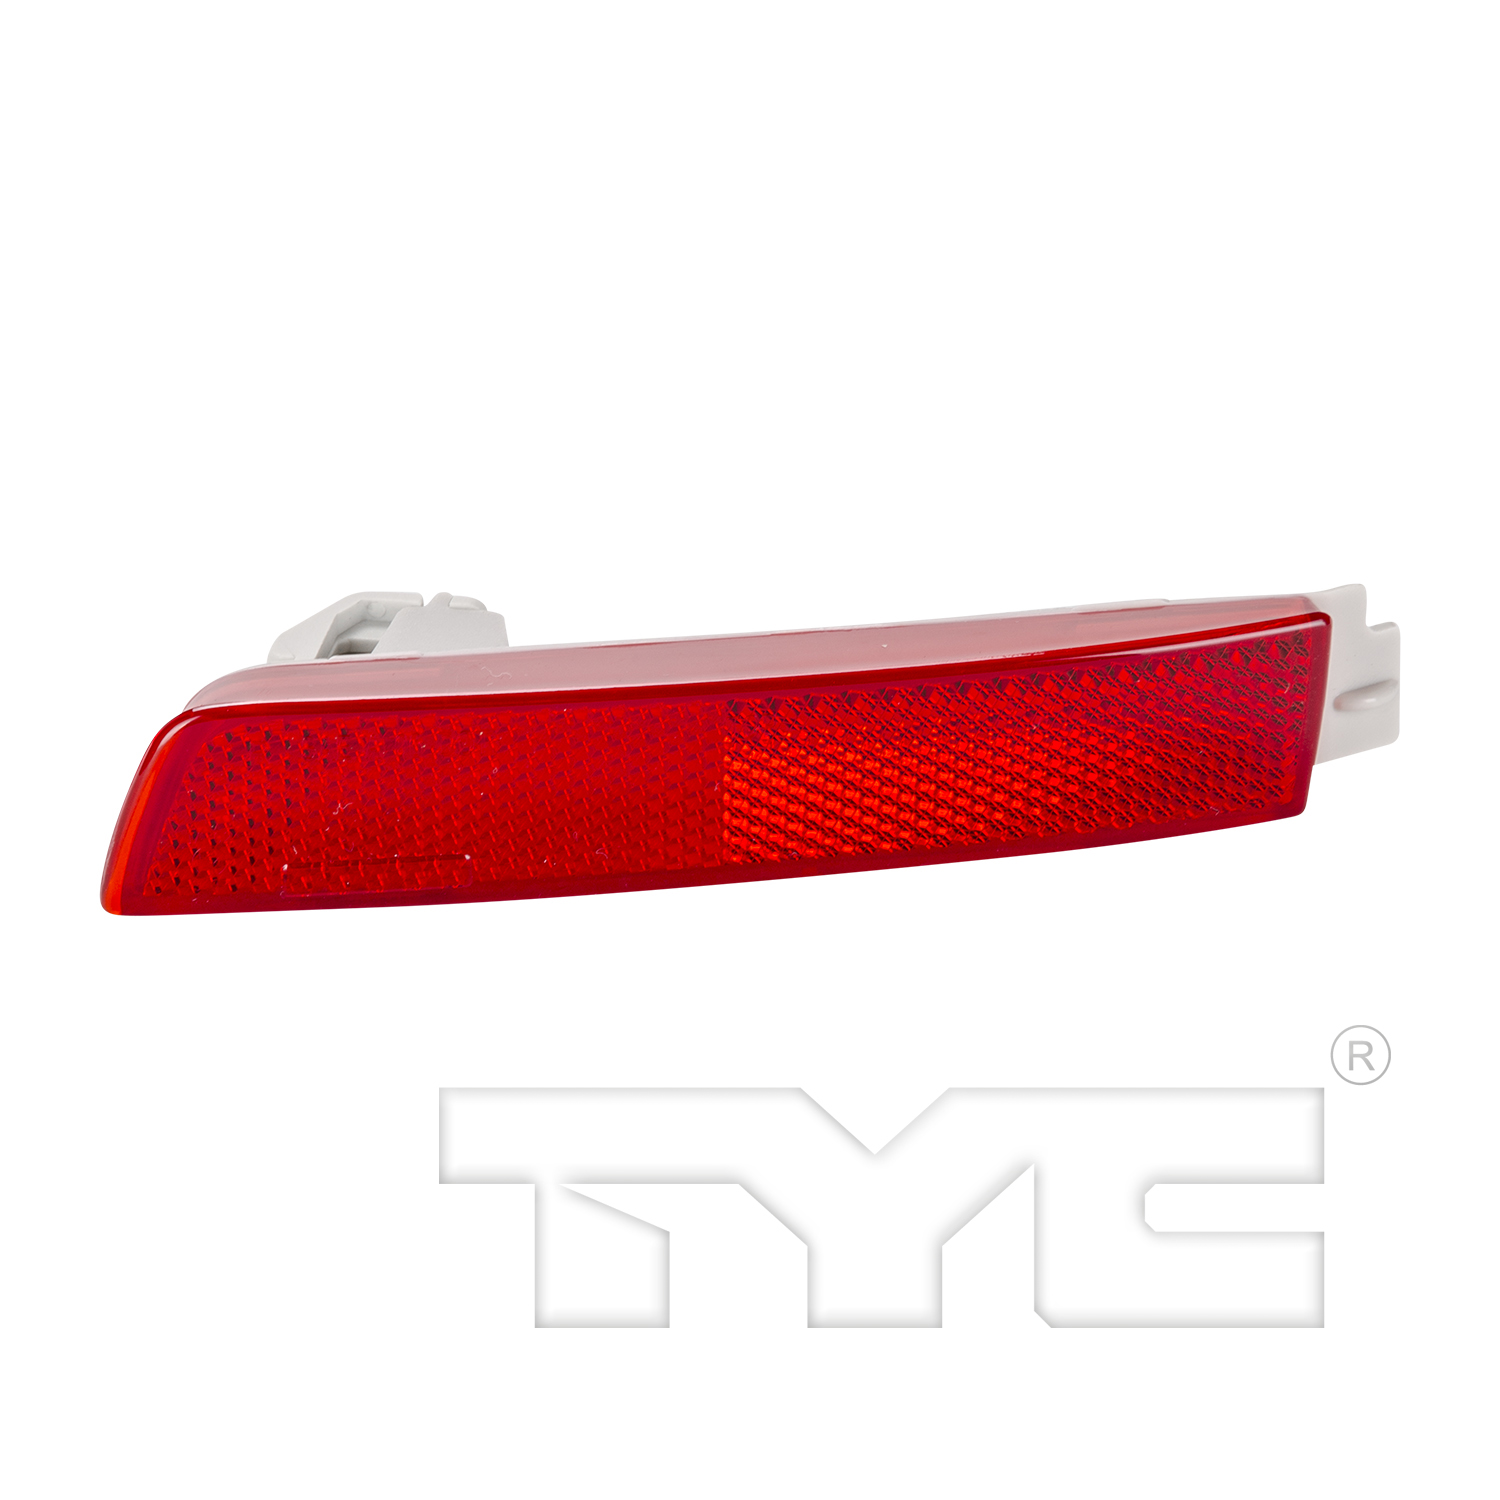 Aftermarket LAMPS for NISSAN - MURANO, MURANO,09-14,RT Rear bumper reflector